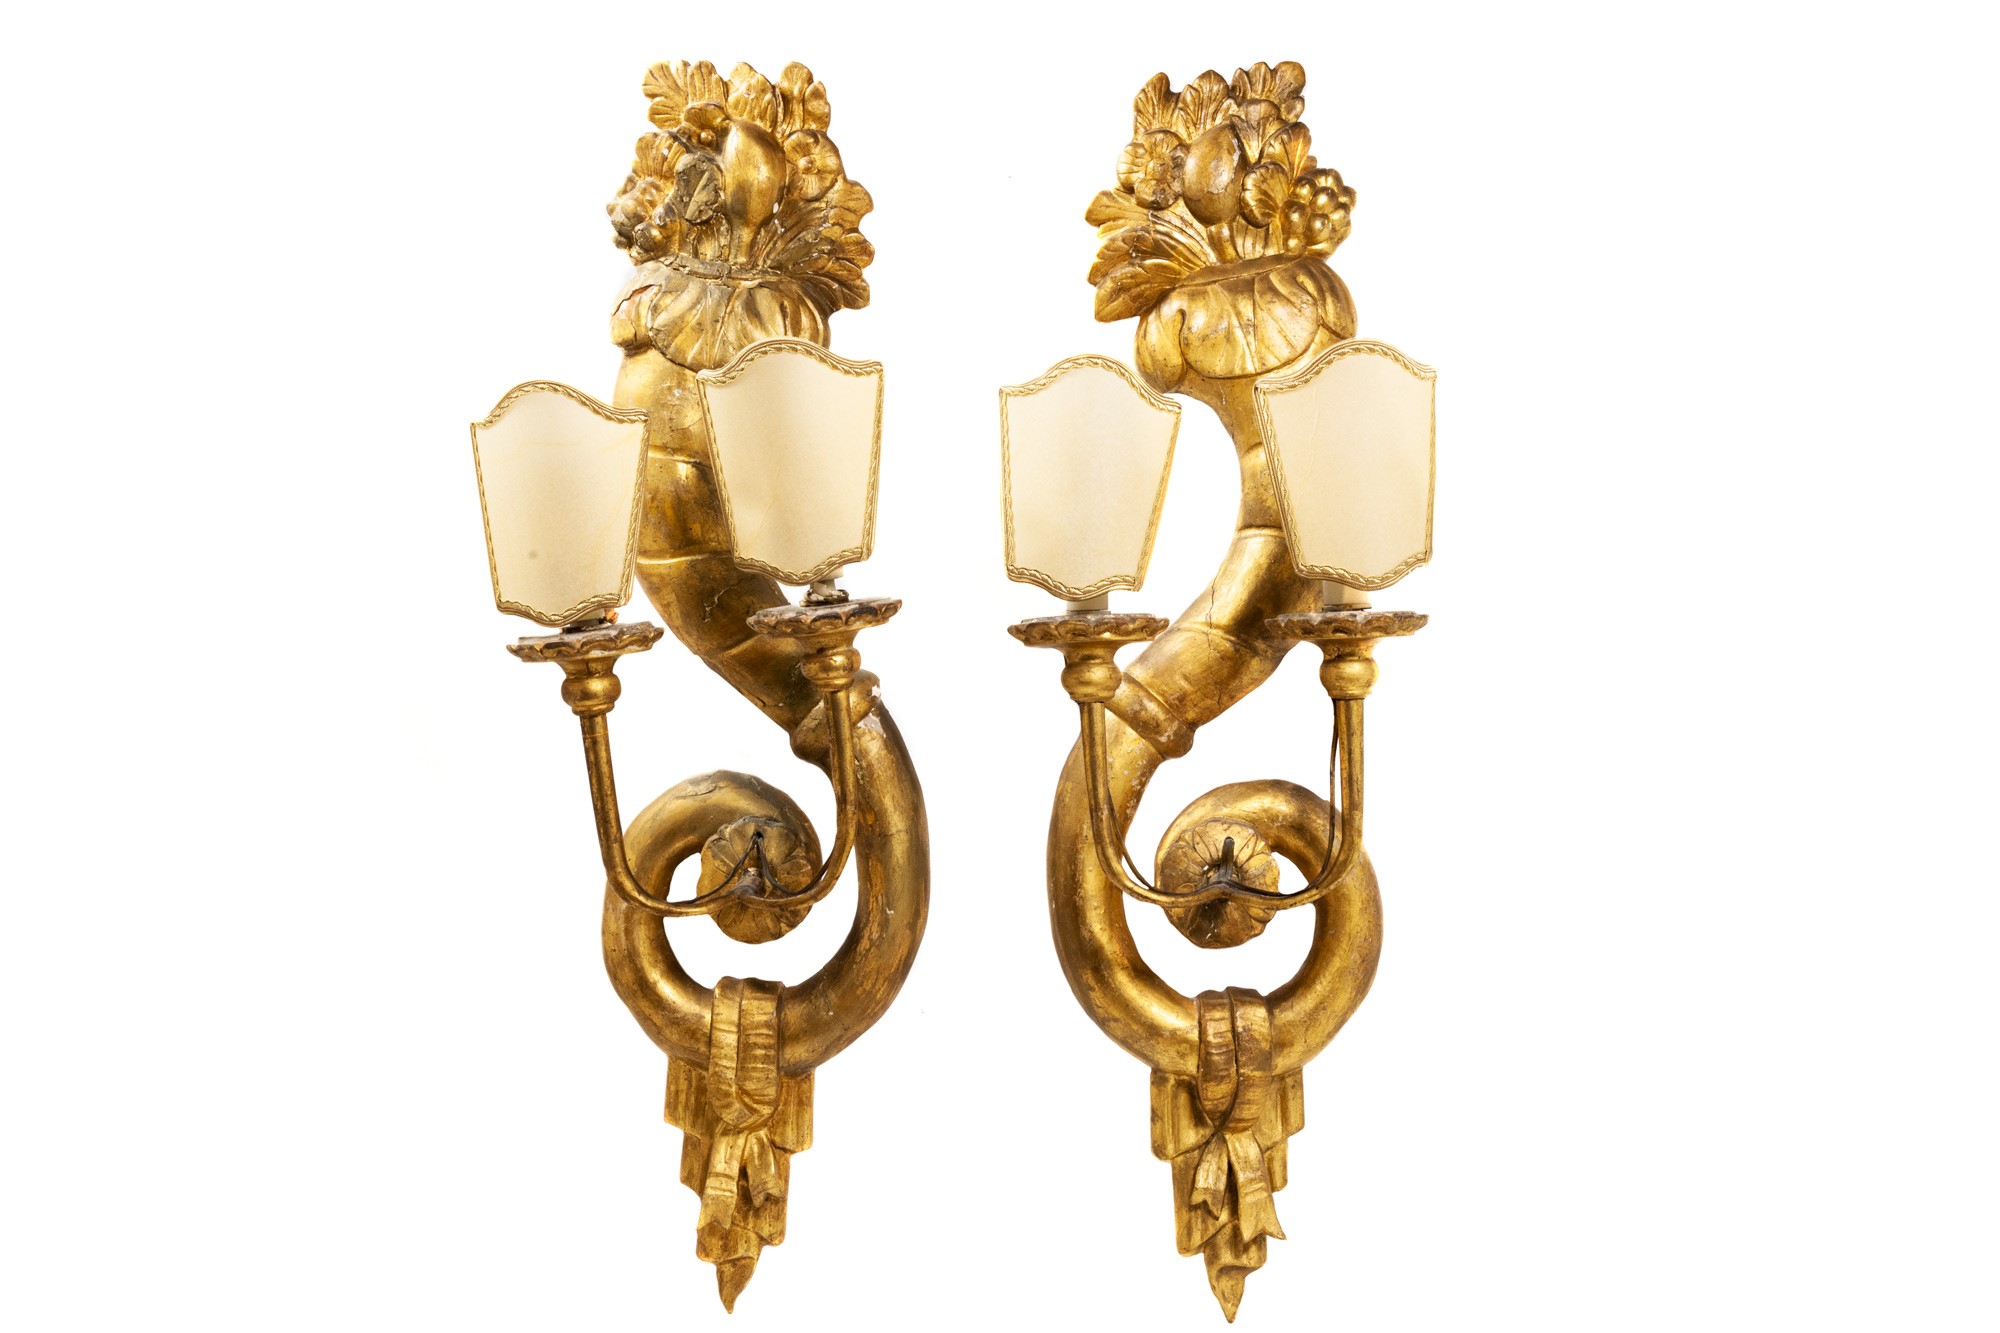 Pair of two-light appliques late 19th century, carved and gilded wood, cornucopia-shaped support,